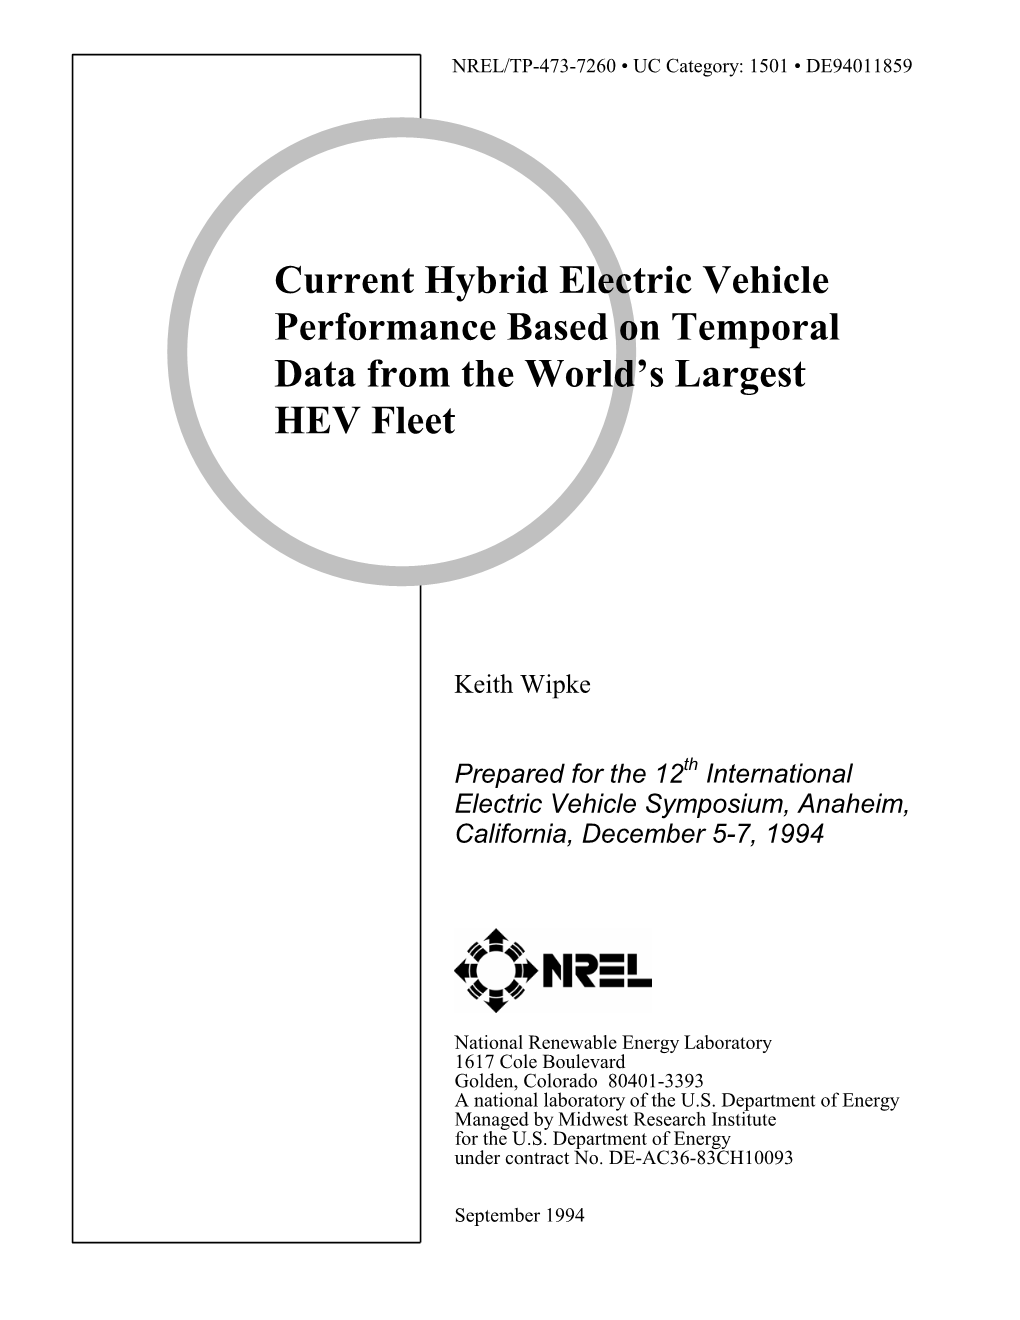 Current Hybrid Electric Vehicle Performance Based on Temporal Data from the World’S Largest HEV Fleet